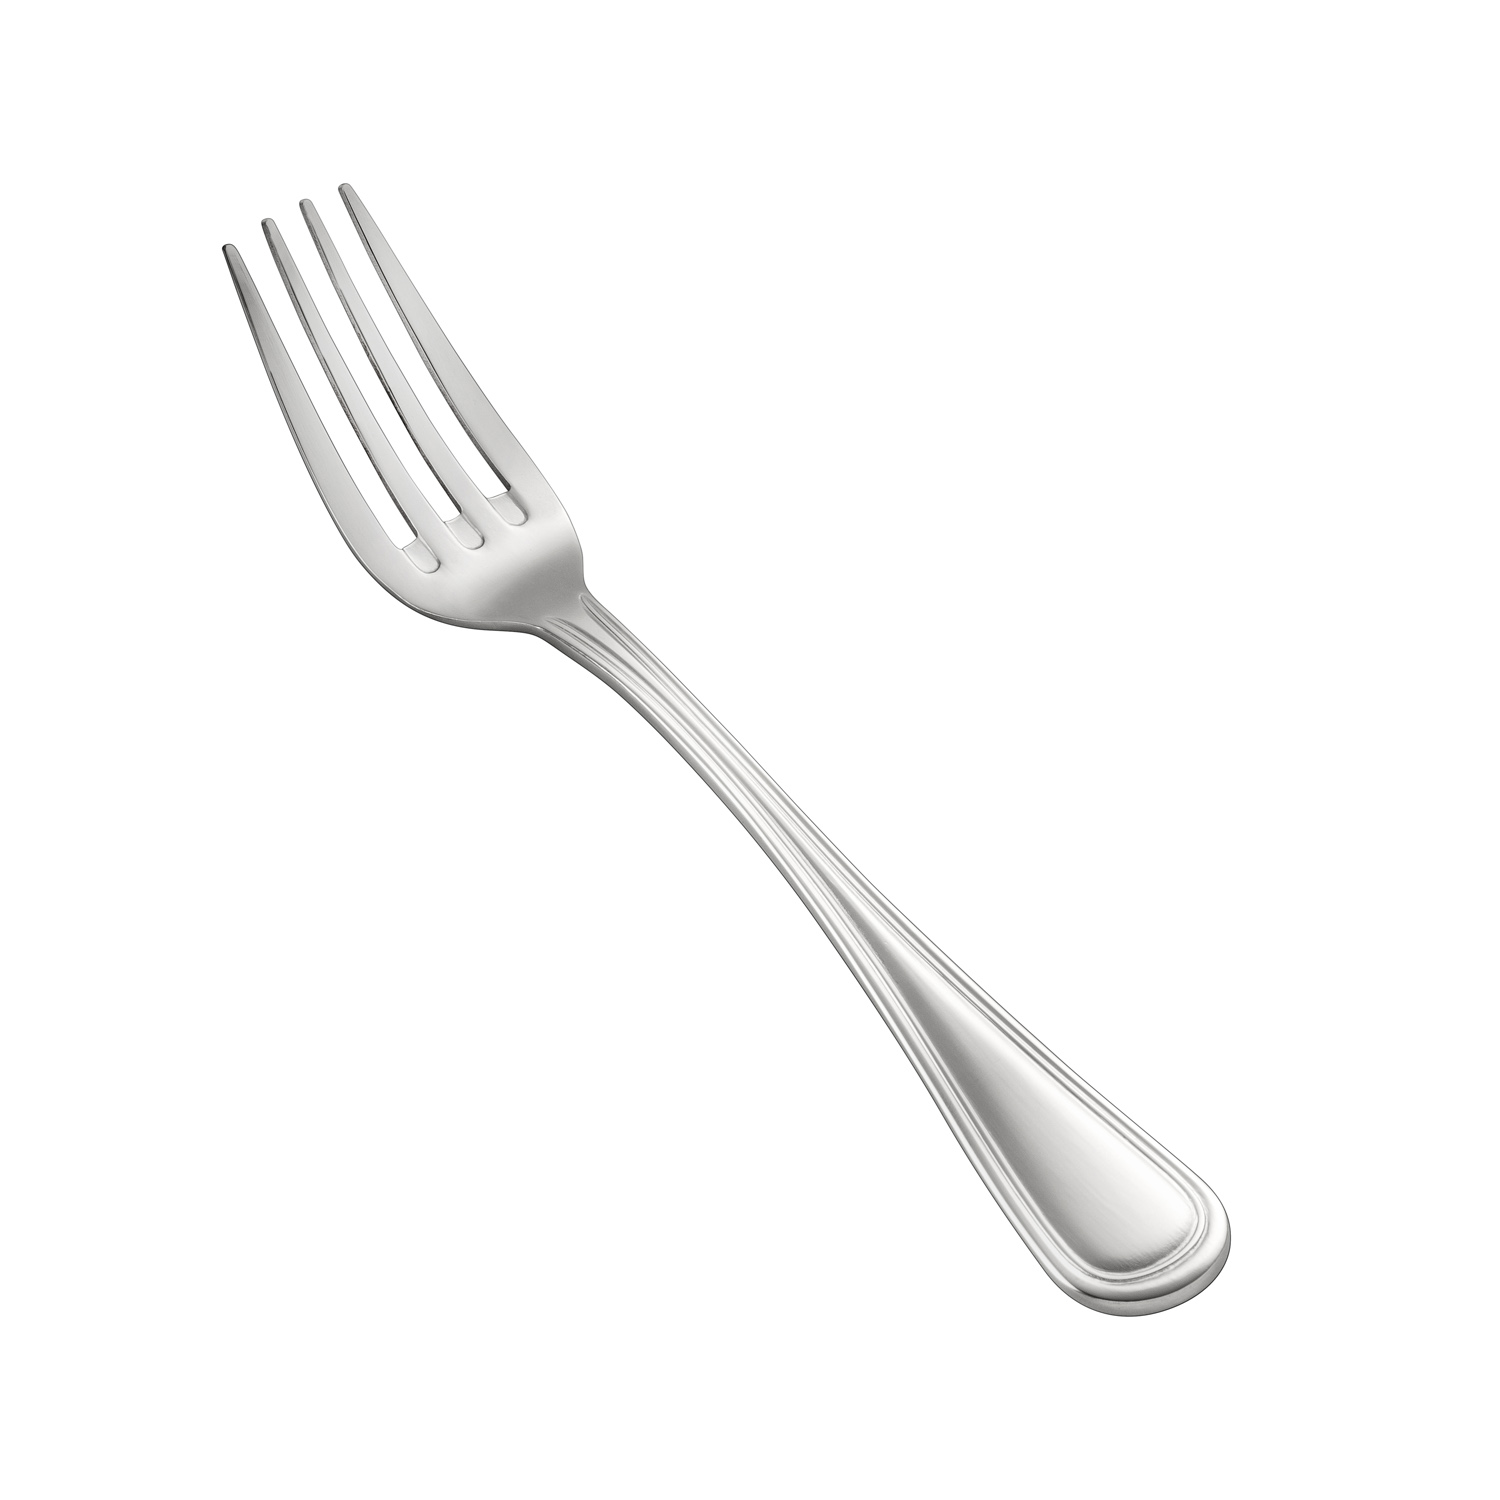 CAC China 8002-05 Elite Dinner Fork, Extra Heavyweight 18/8, 7 1/4"